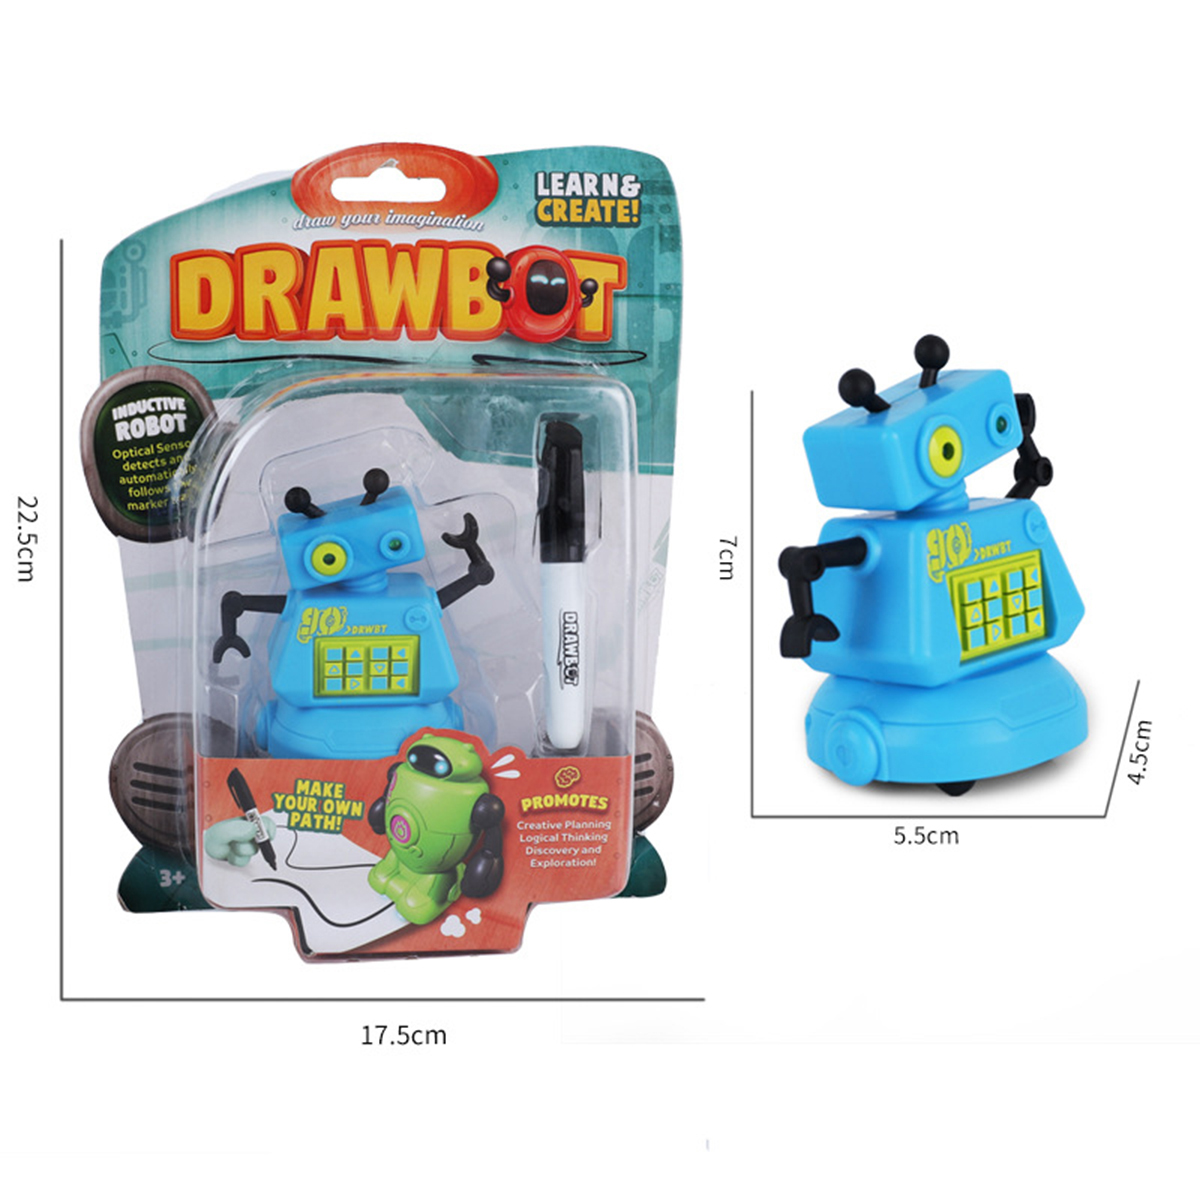 Scribing-Induction-Car-Creative-Follow-Any-Drawn-Line-Pen-Inductive-Cute-Model-Children-Toy-Gift-1773423-14